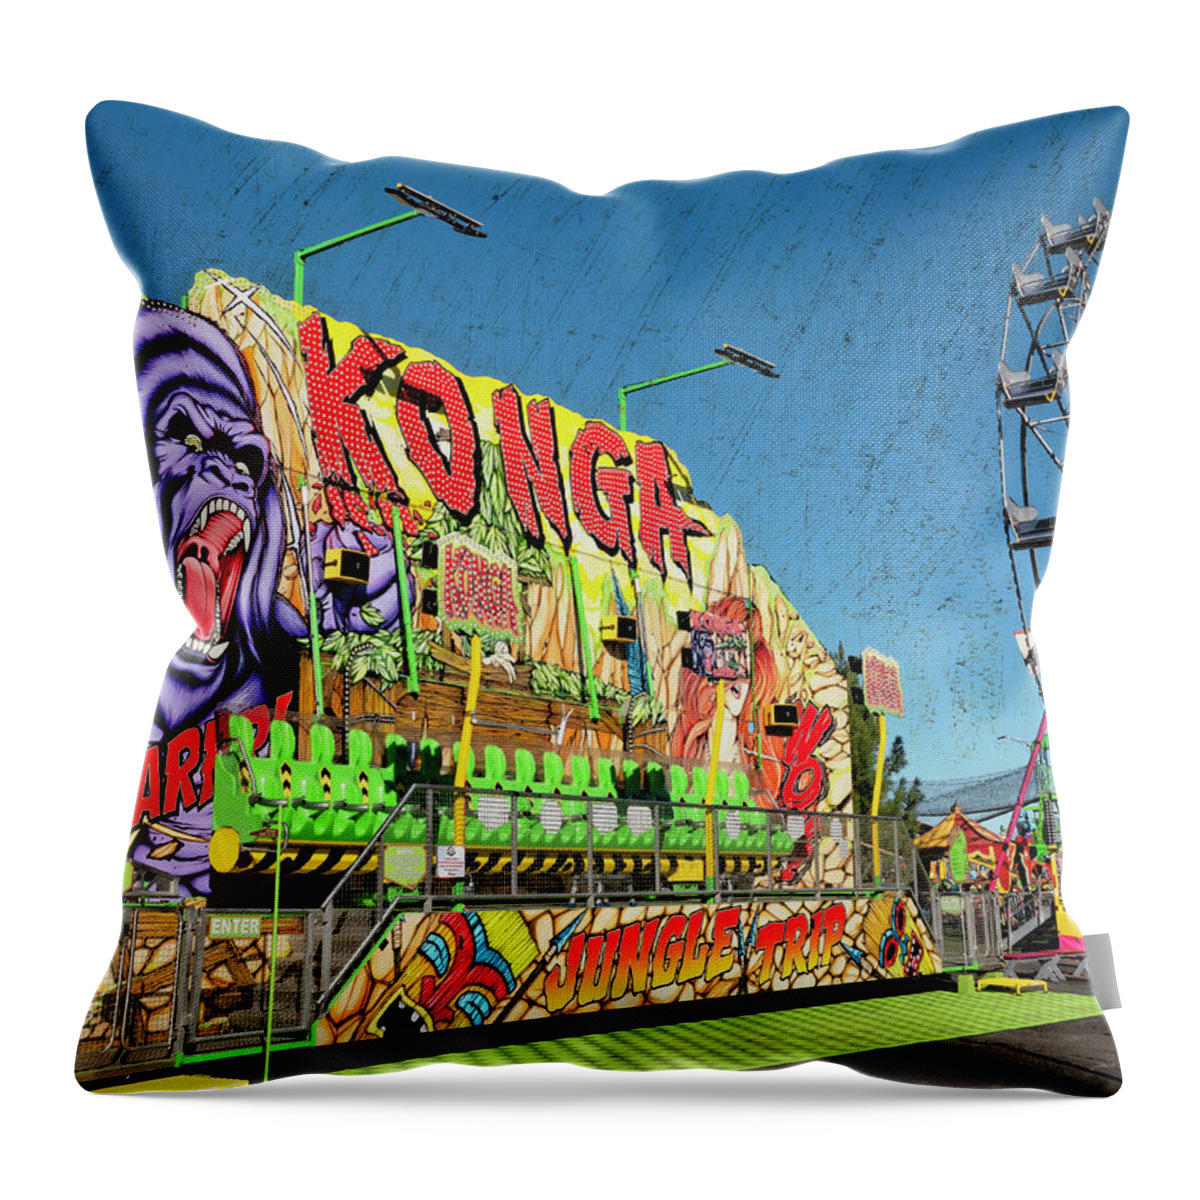 Carnival Throw Pillow featuring the photograph The Carnival by Sandra Selle Rodriguez